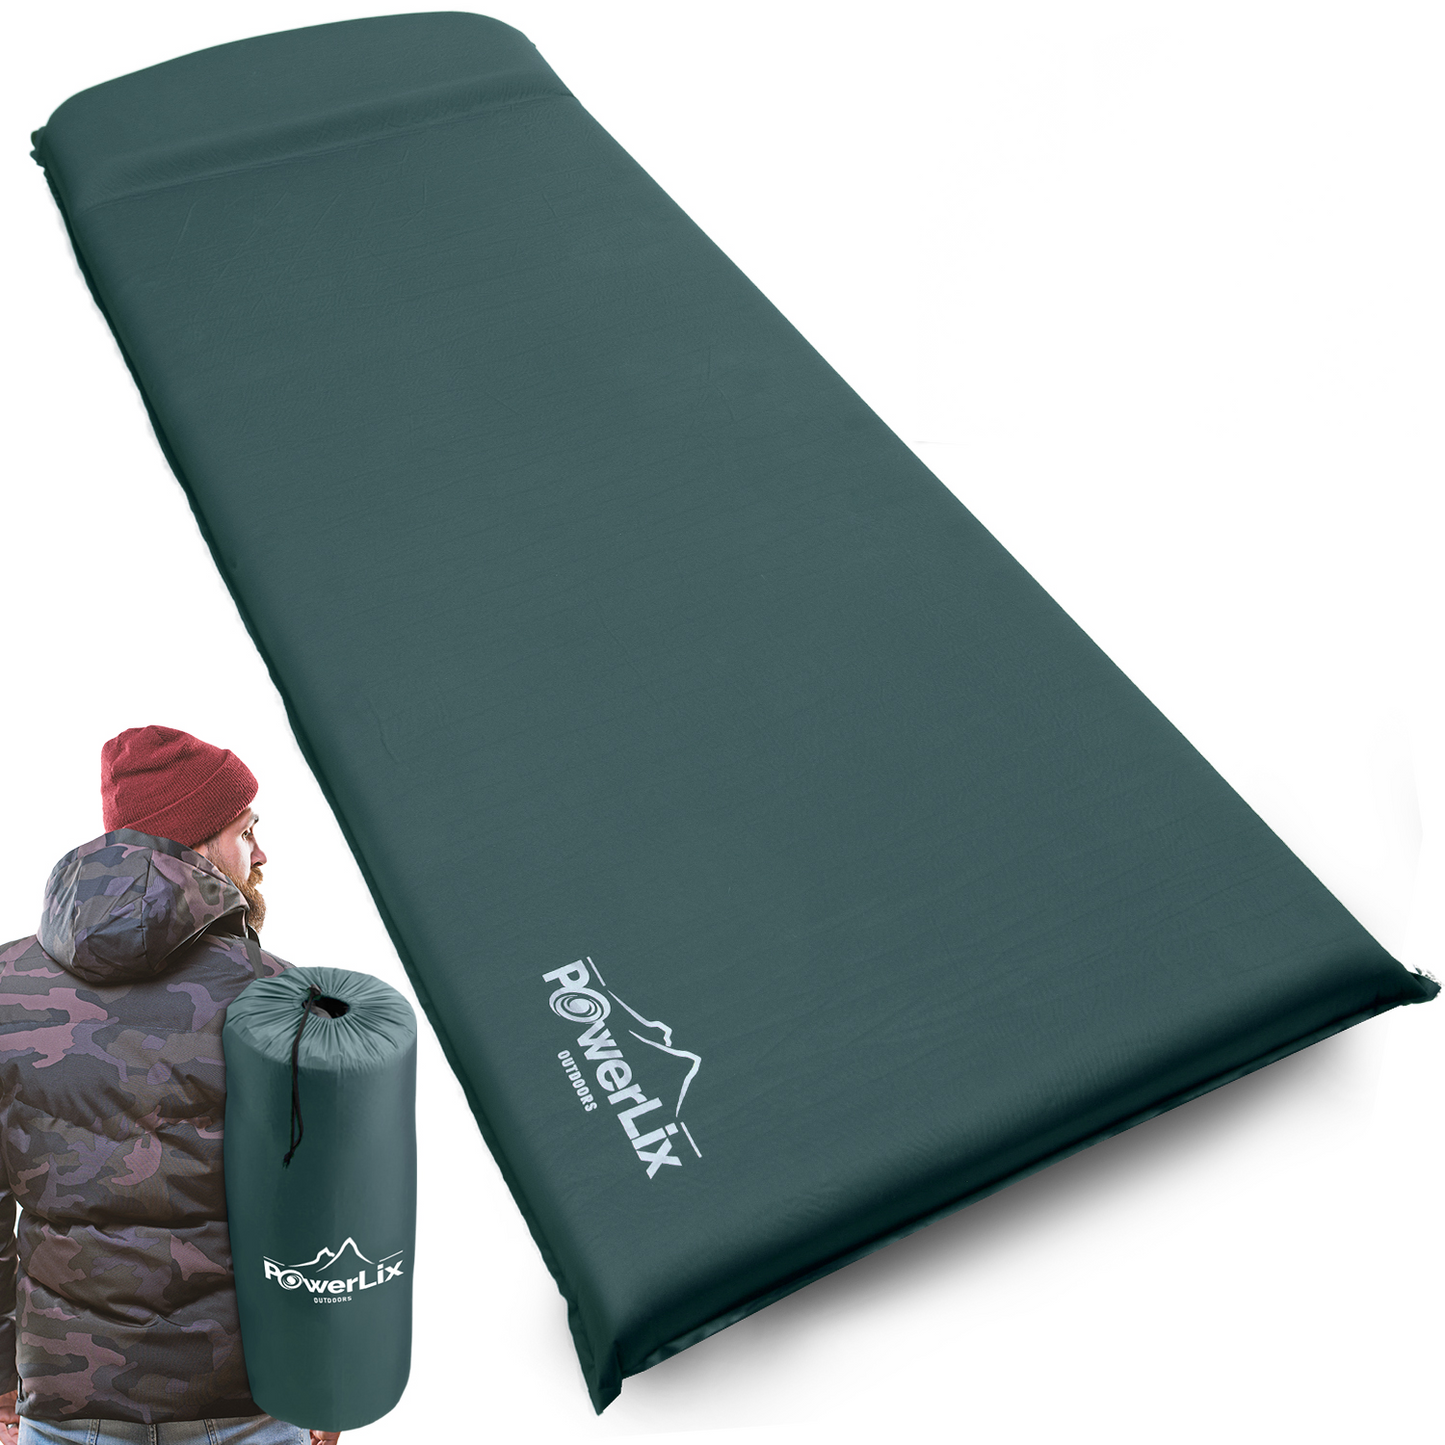 a person standing next to a sleeping bag with text: 'PowerLix OUTDOORS PowerLix'